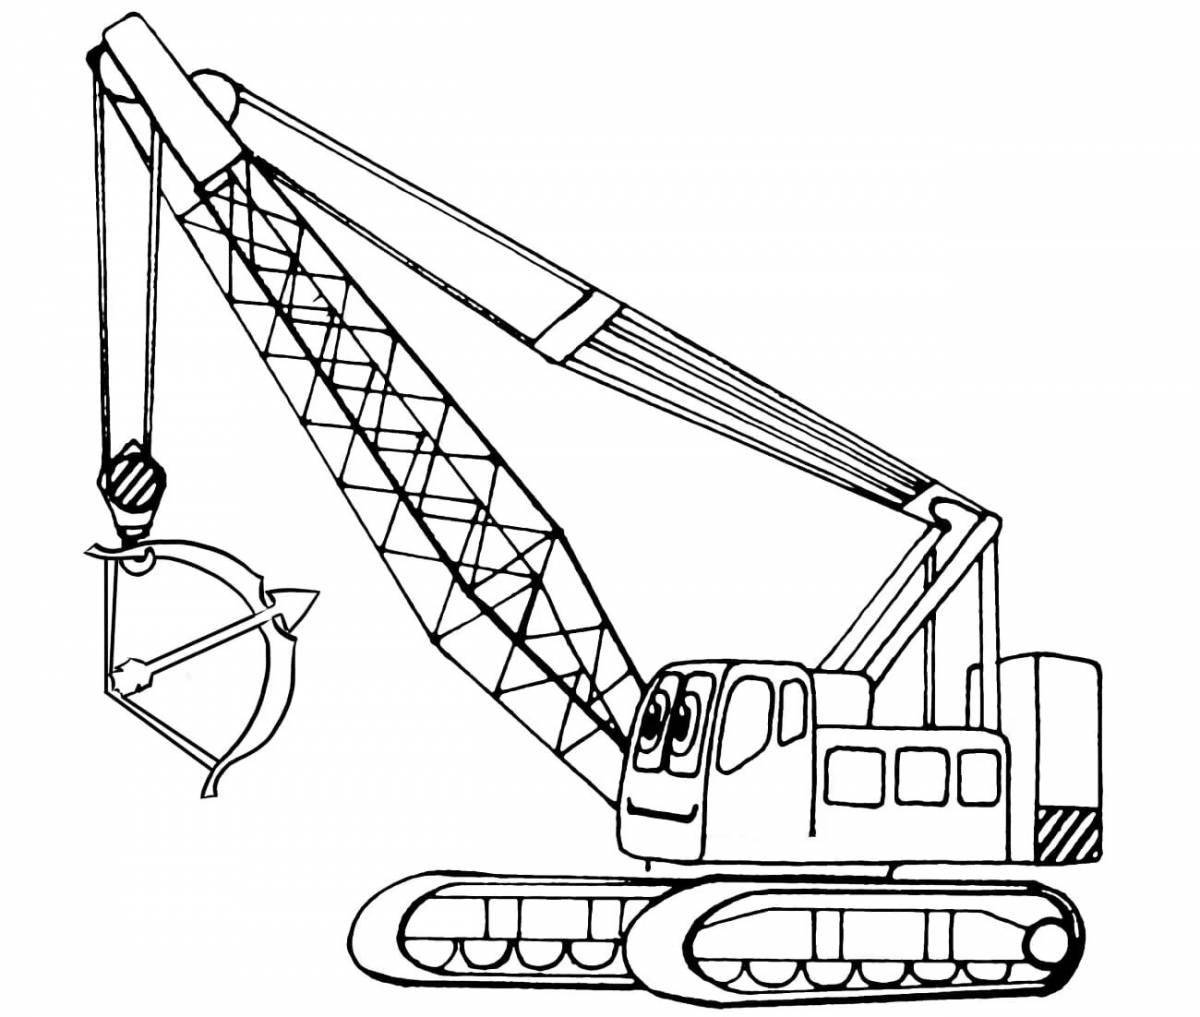 Colorful truck crane coloring page for students